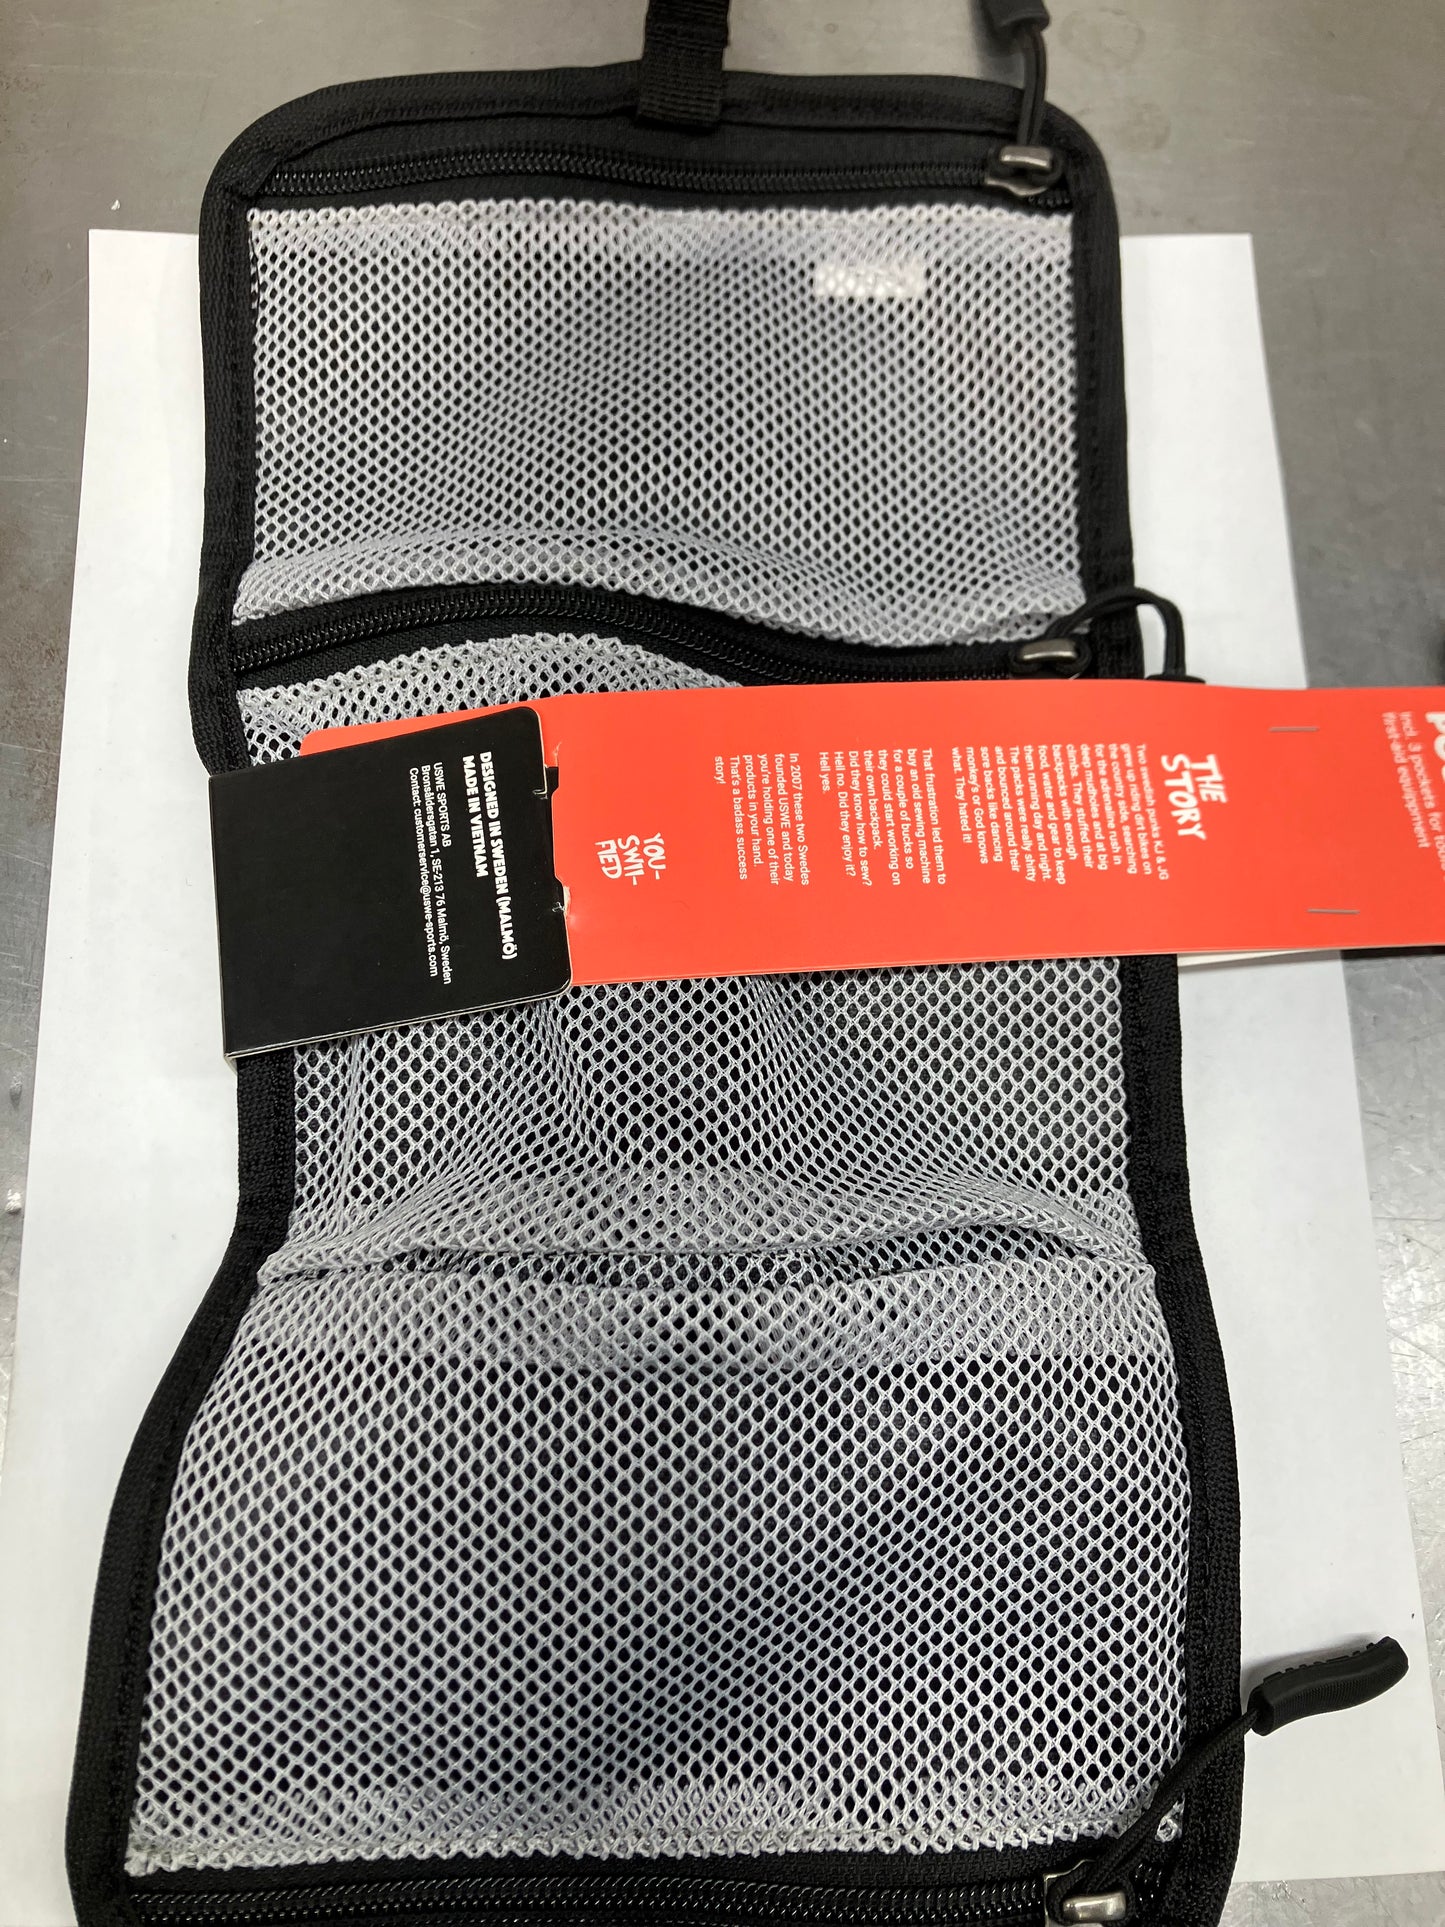 USWE TOOL POUCH